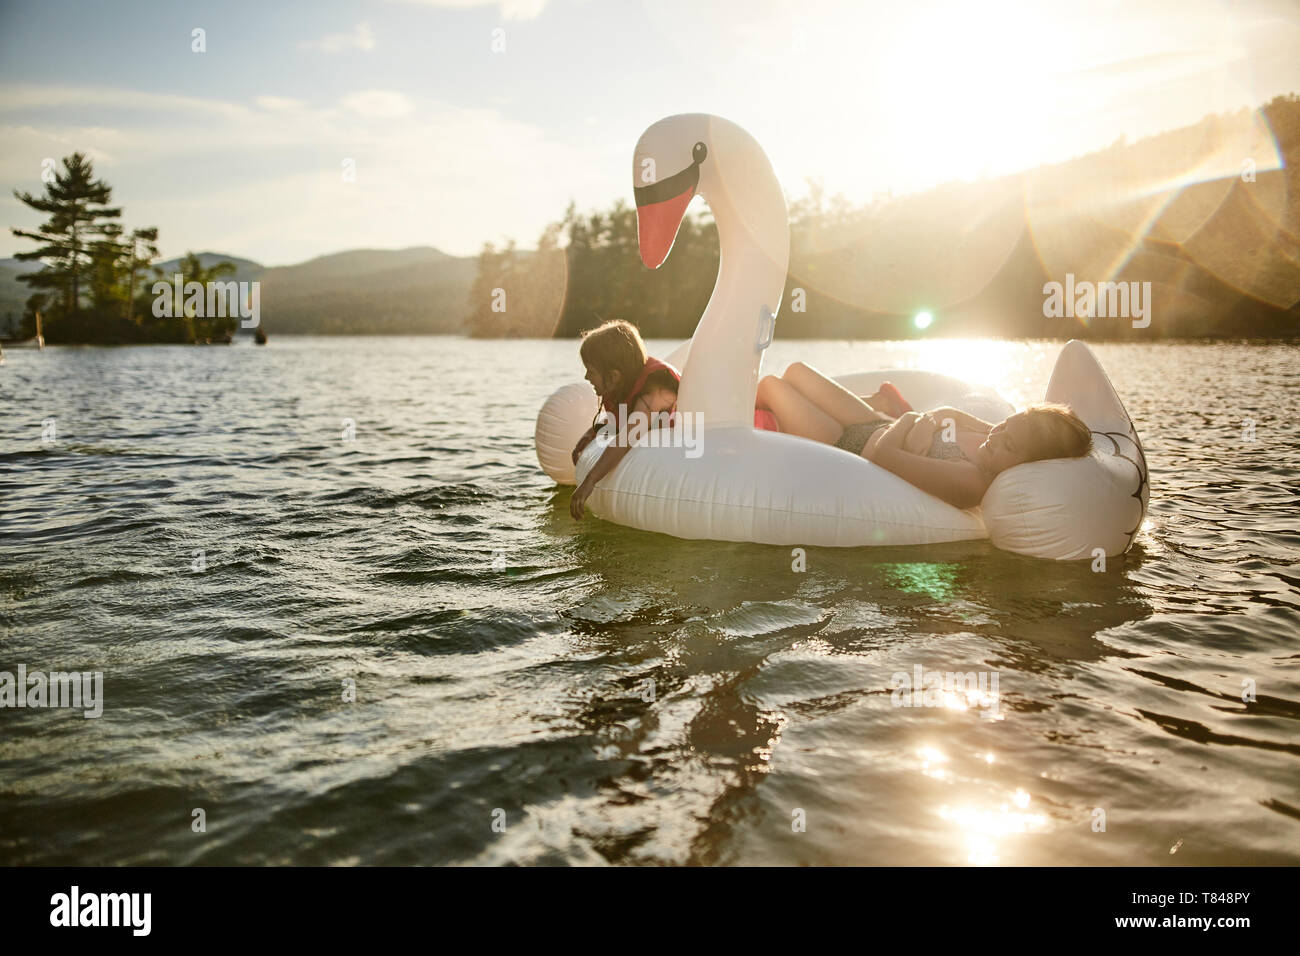 Girls playing on inflatable swan in lake Stock Photo